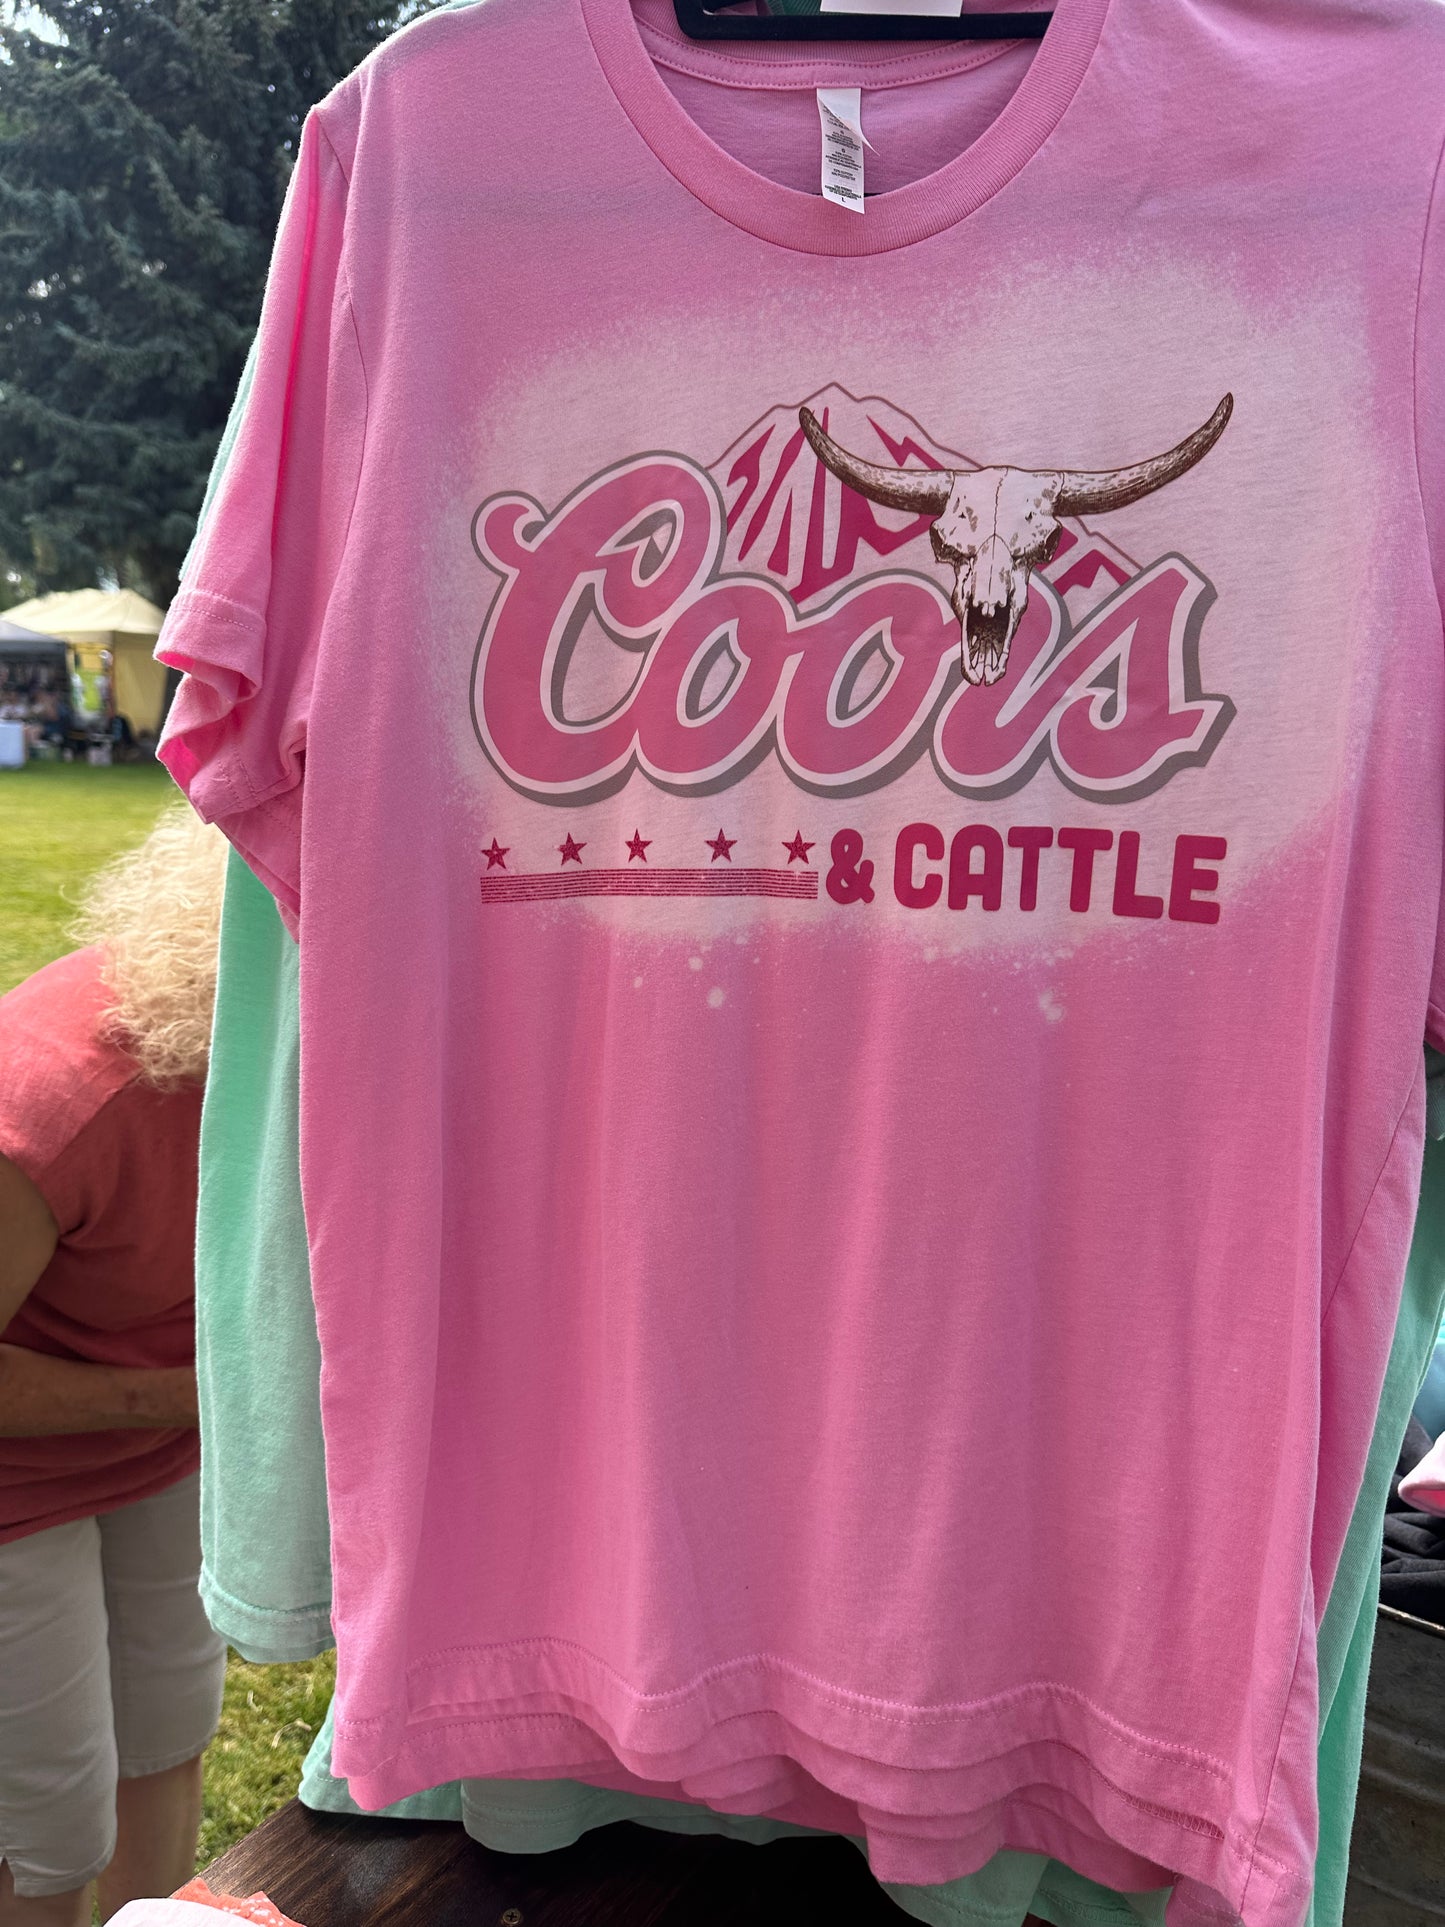 Coors and Cattle